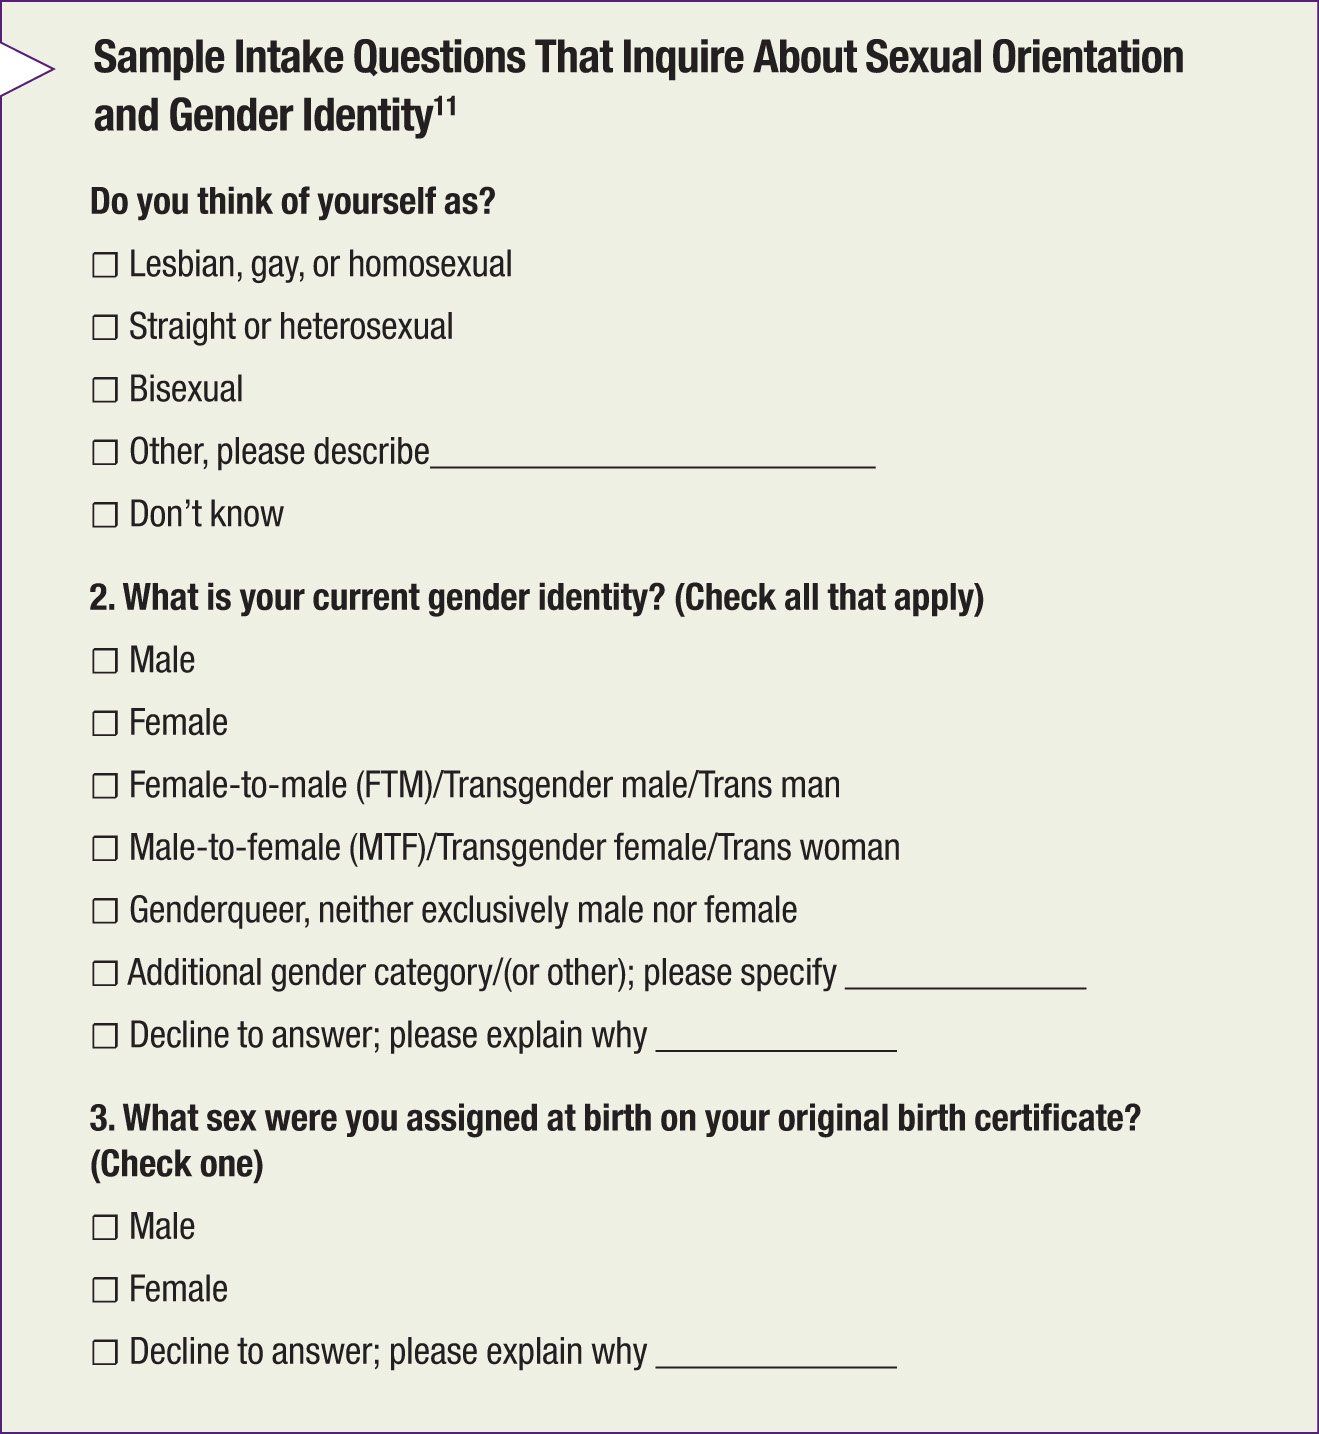 Sample Questions That Inquire About Sexual Orientation and Gender Identity